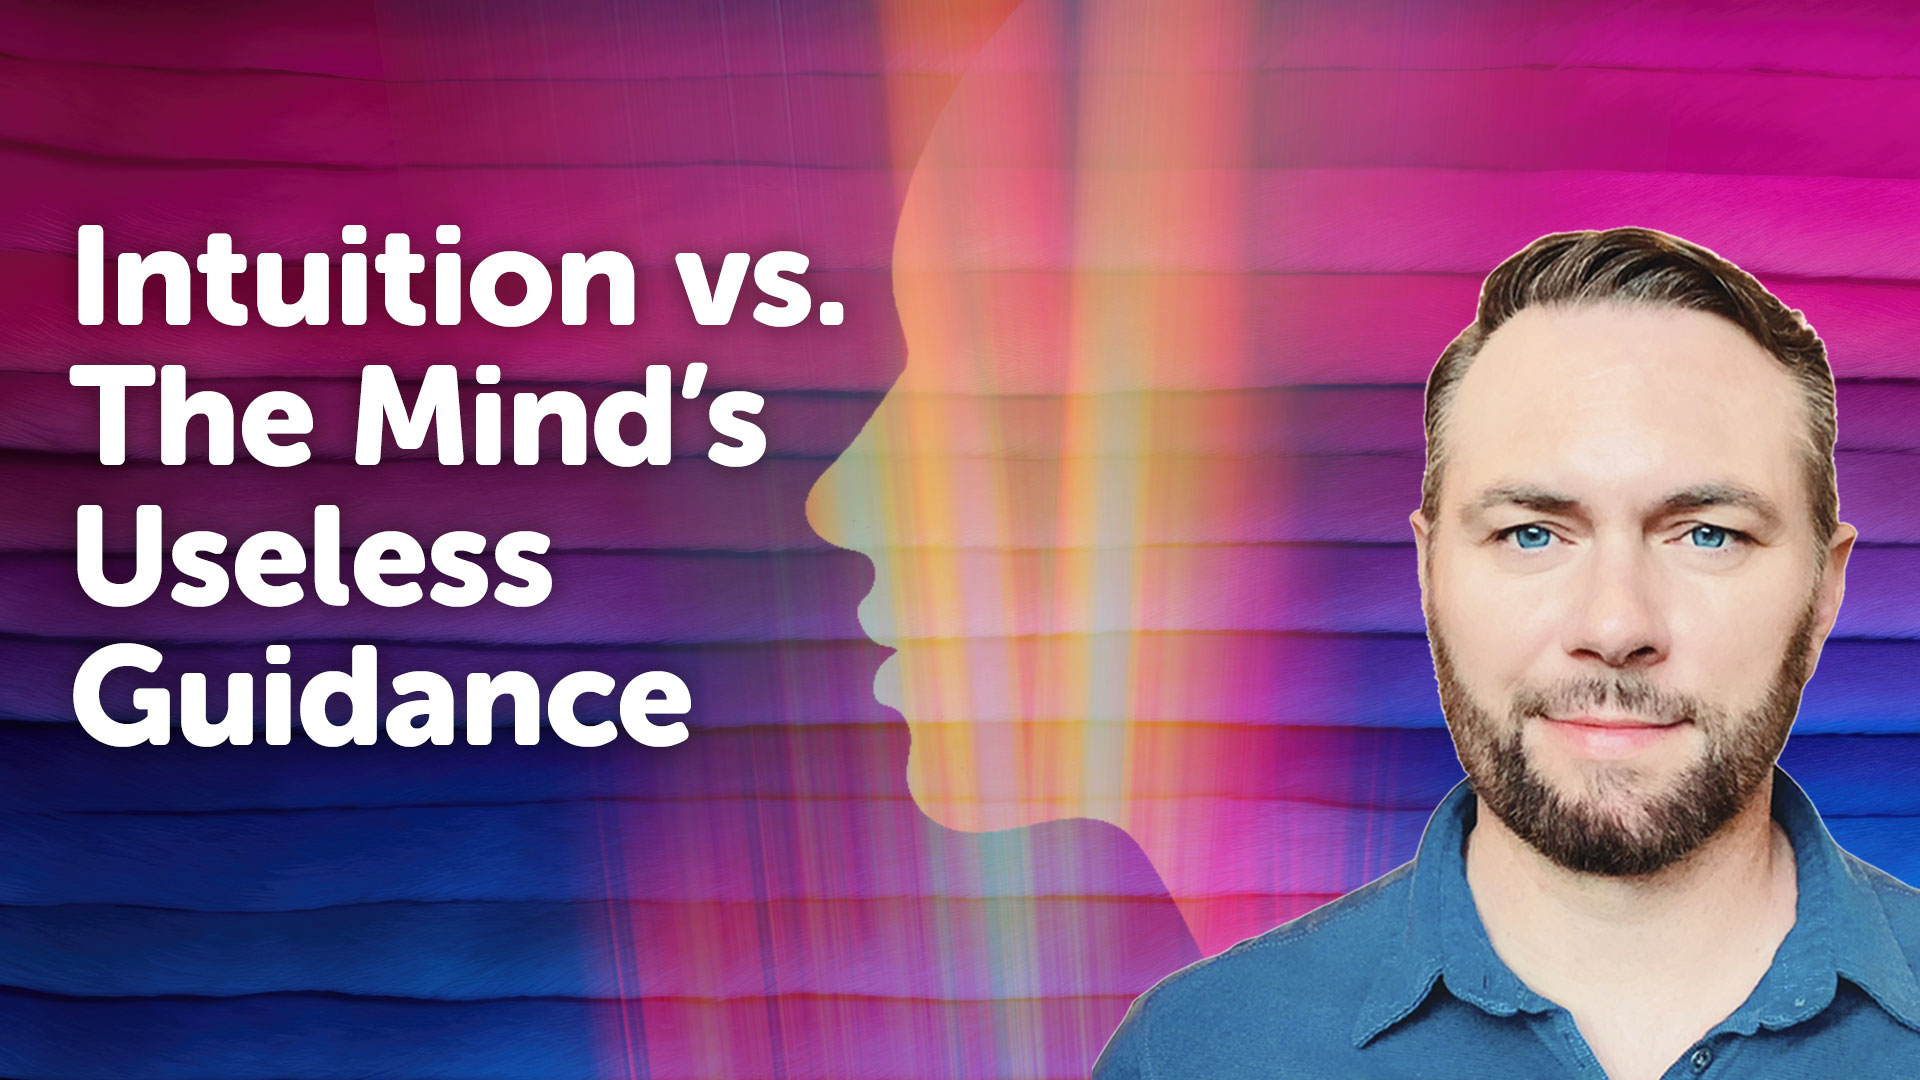 Intuition vs. The Mind’s Useless Guidance